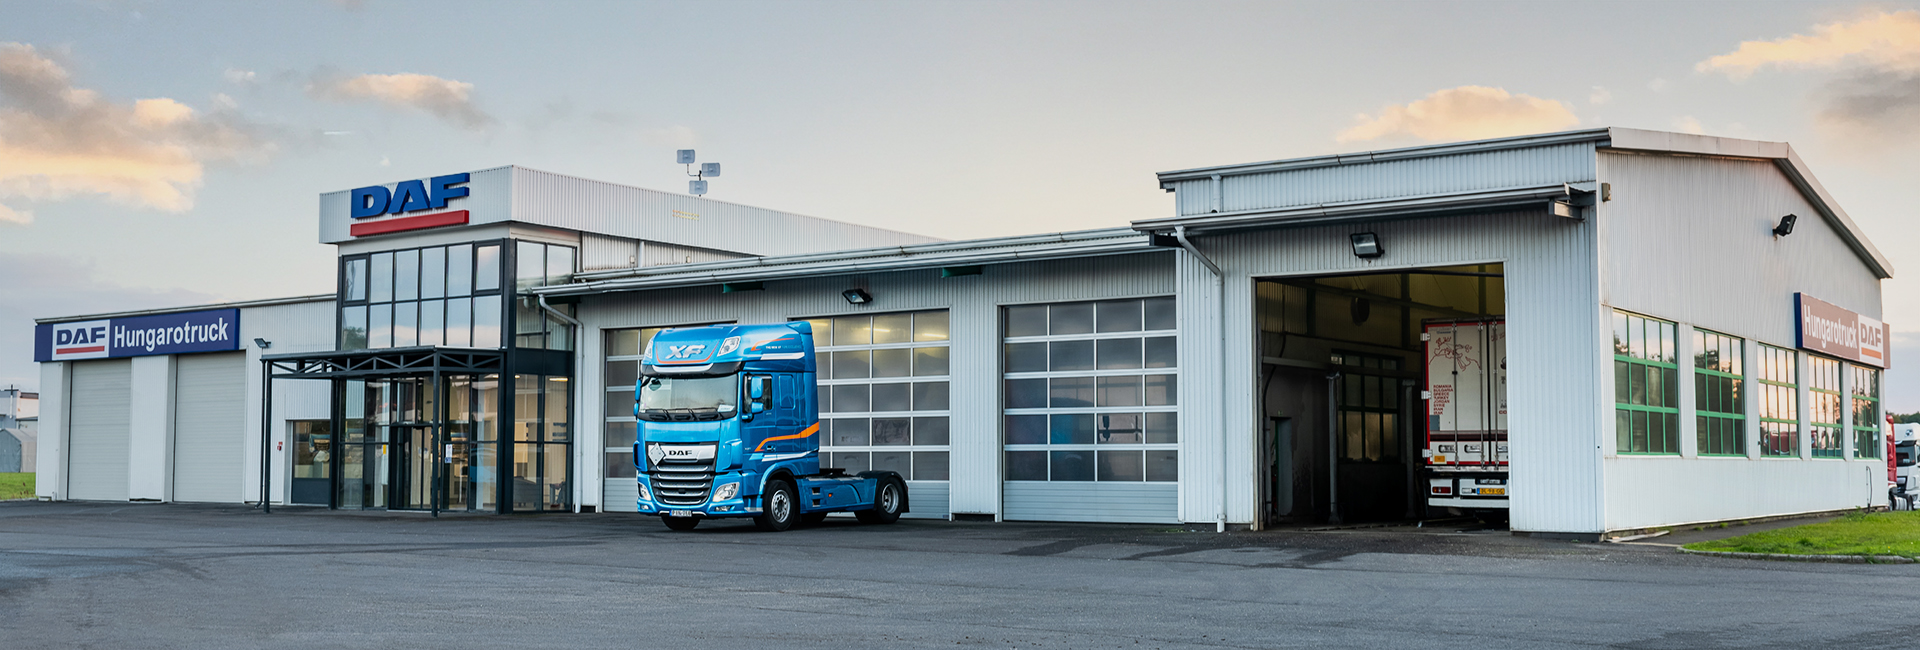 DAF-opens-new-company-owned-dealership-in-Hungary-fw